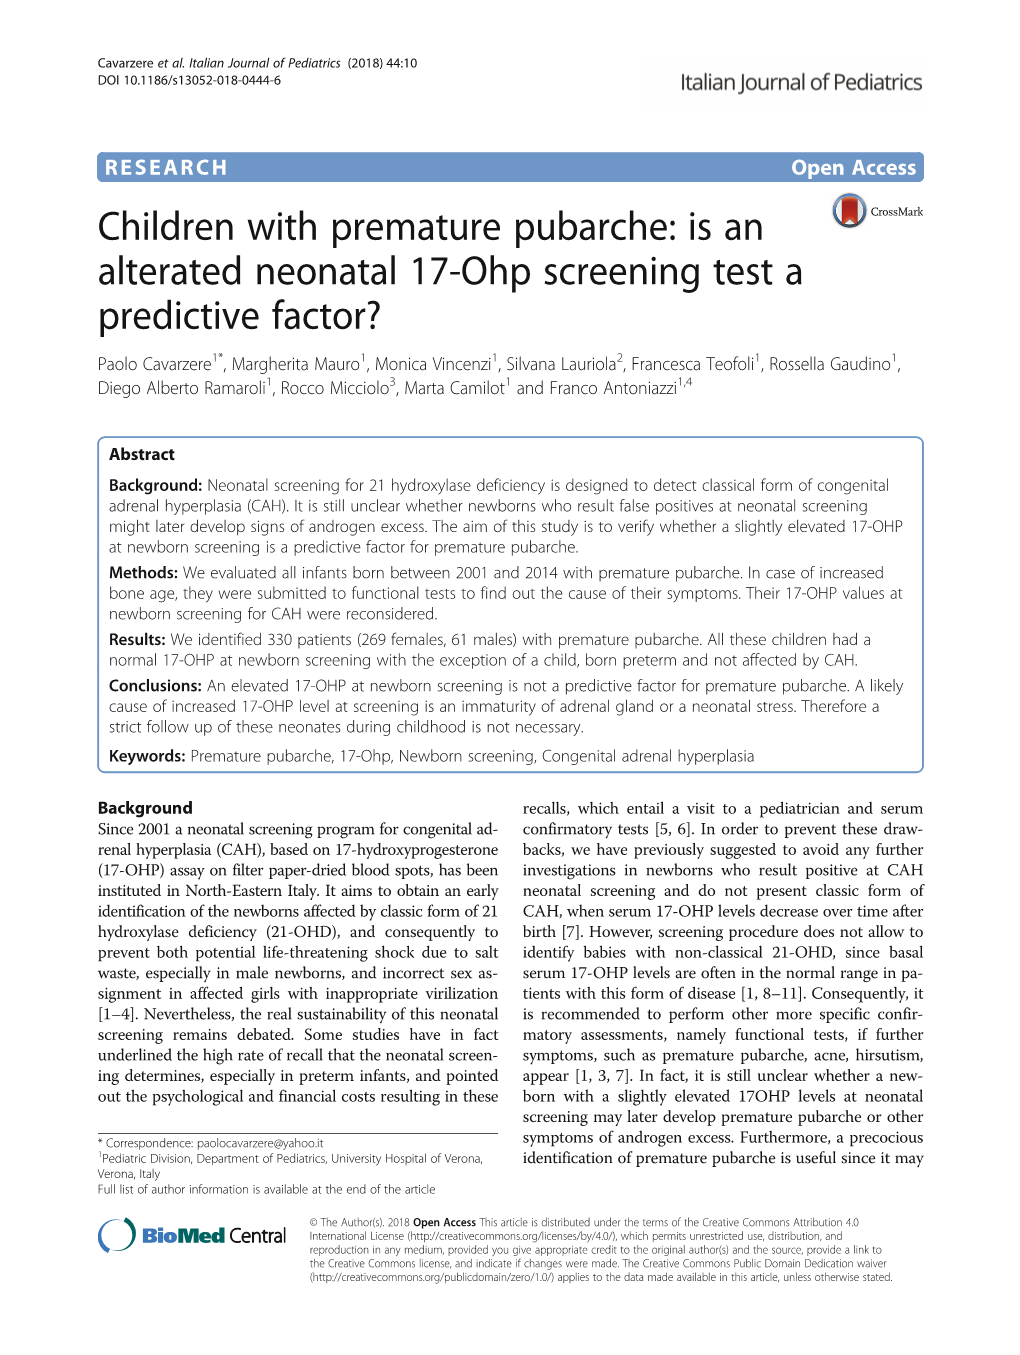 Children with Premature Pubarche: Is an Alterated Neonatal 17-Ohp